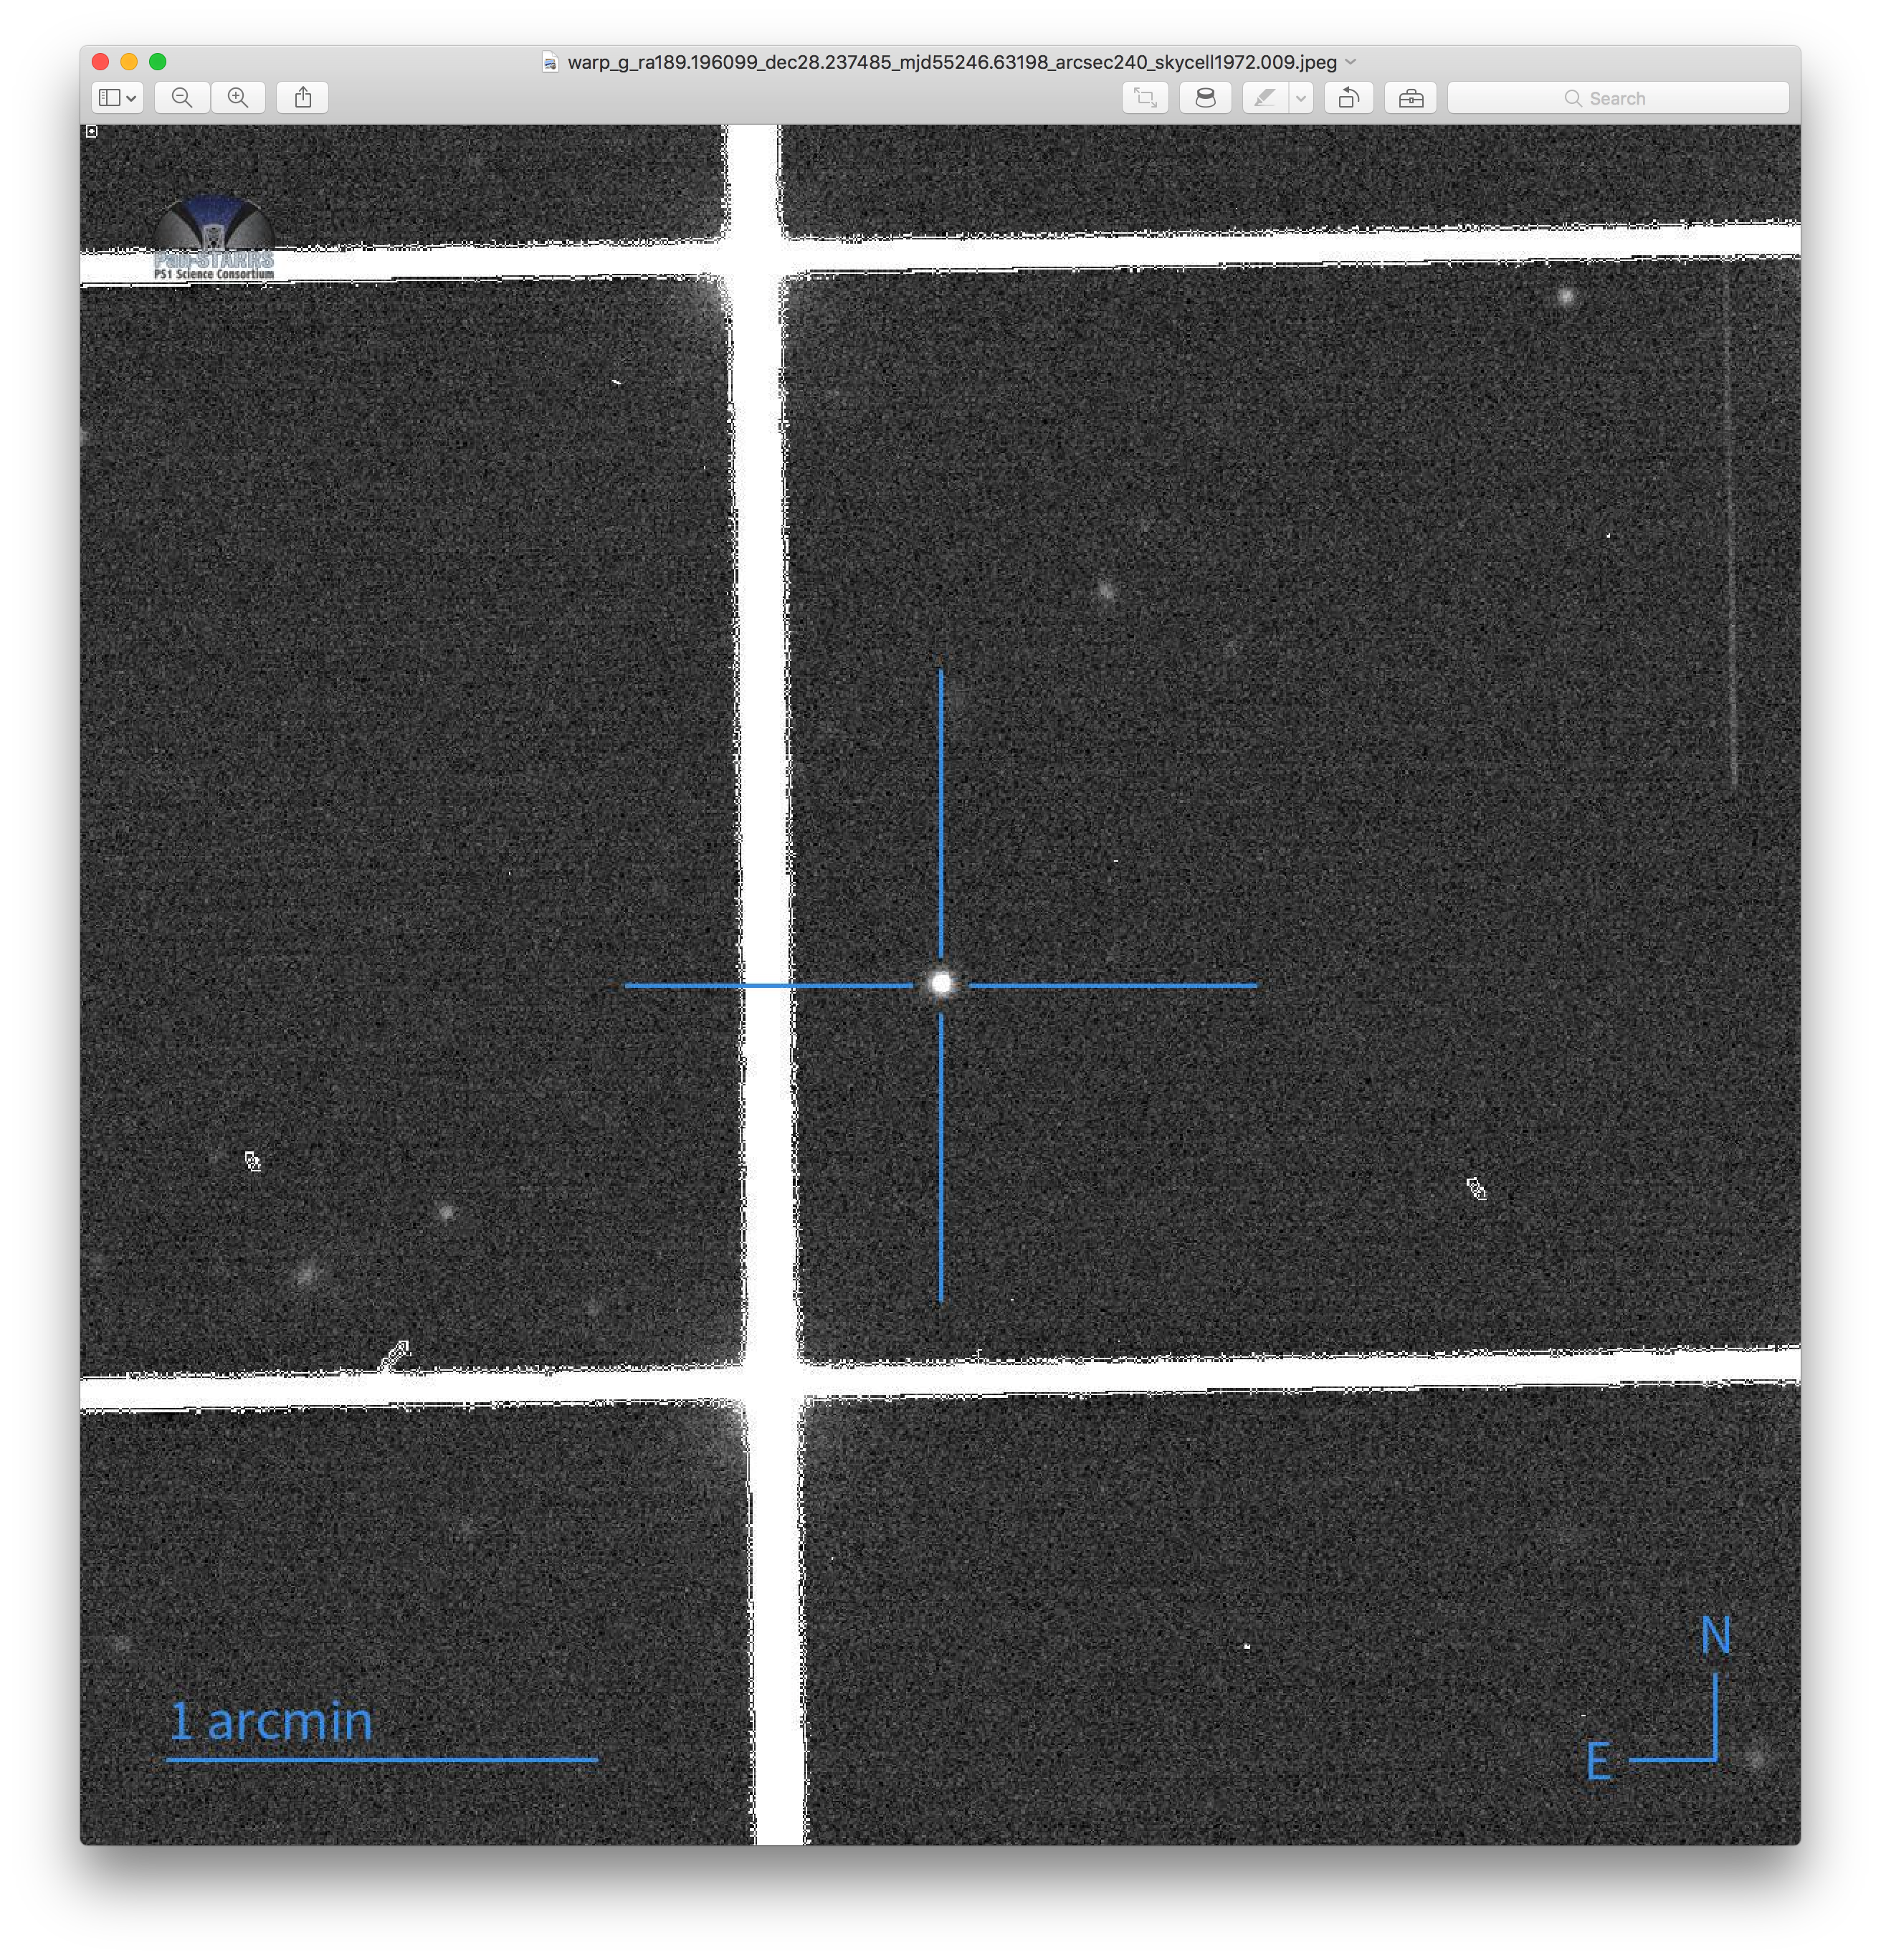 The resulting jpeg image with target clearly visible in centre